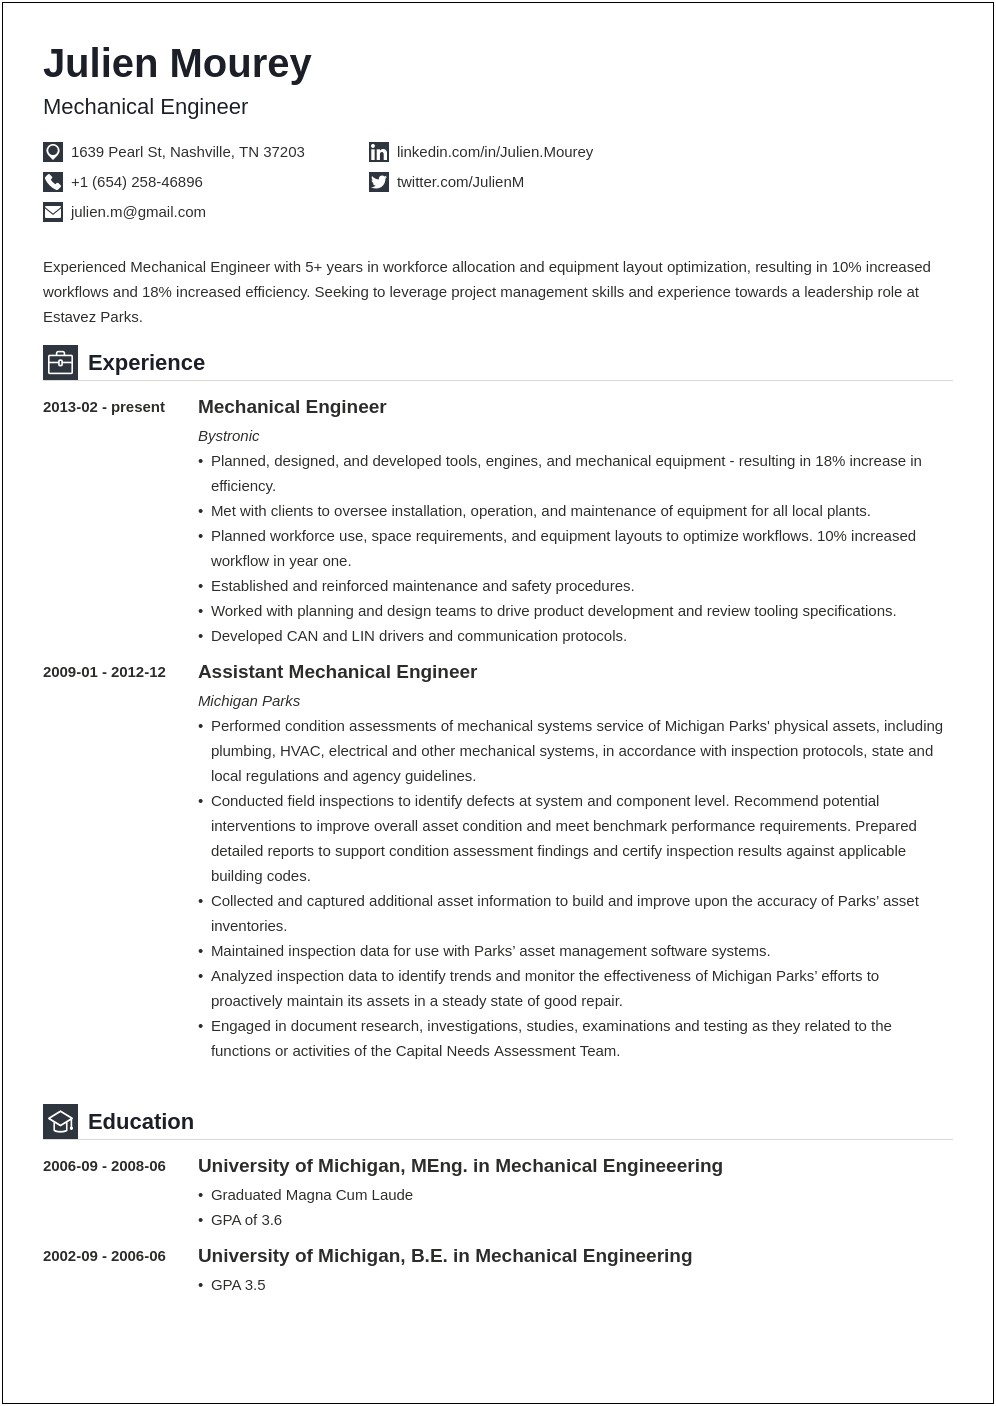 Work Experience Resume For Mechanical Engineer